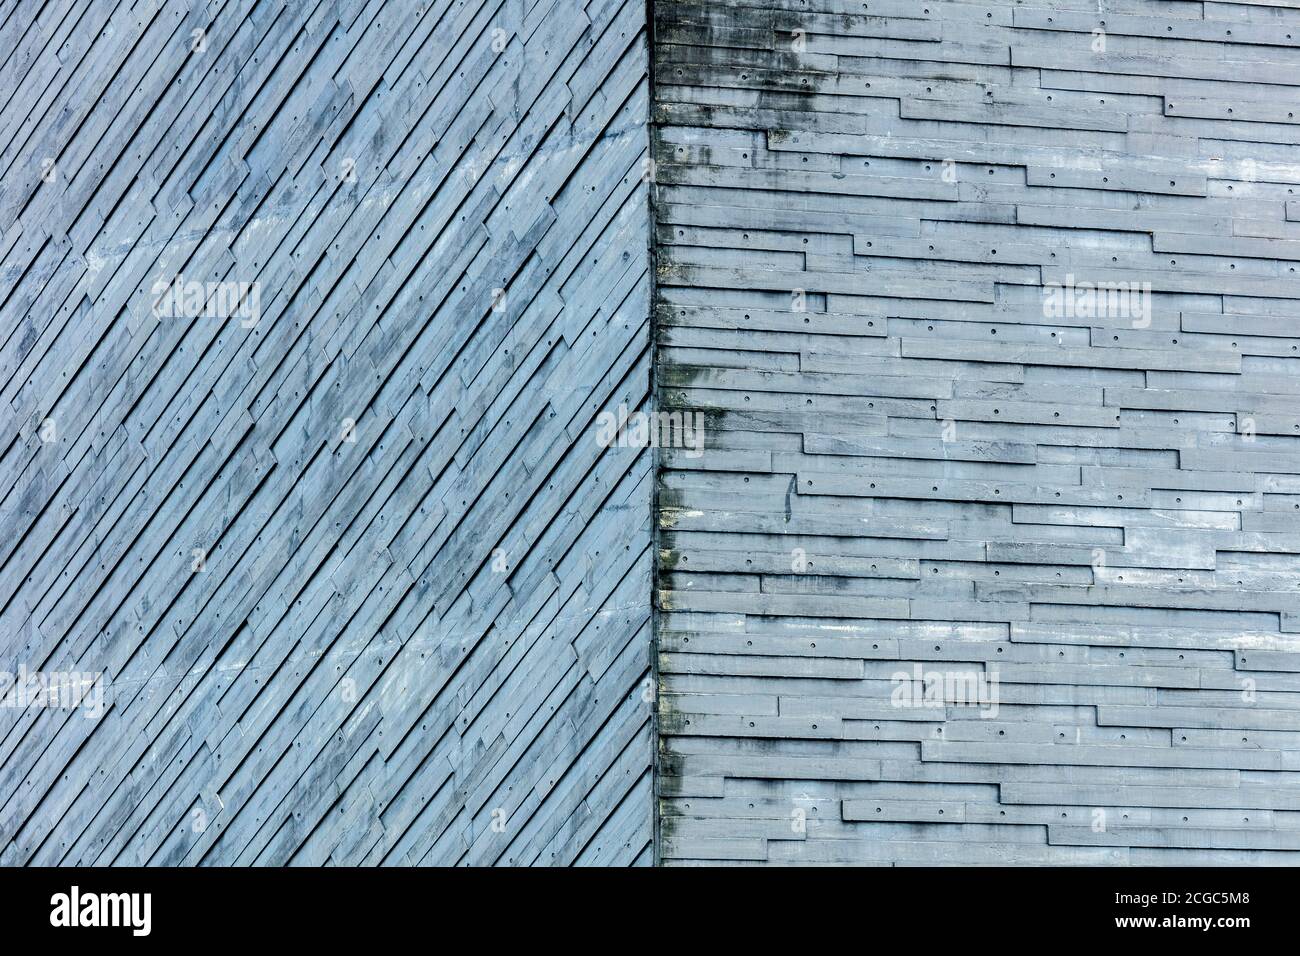 Exterior detail of the Lee Kong Chian Natural History Museum, Faculty of Science, National University of Singapore. Stock Photo